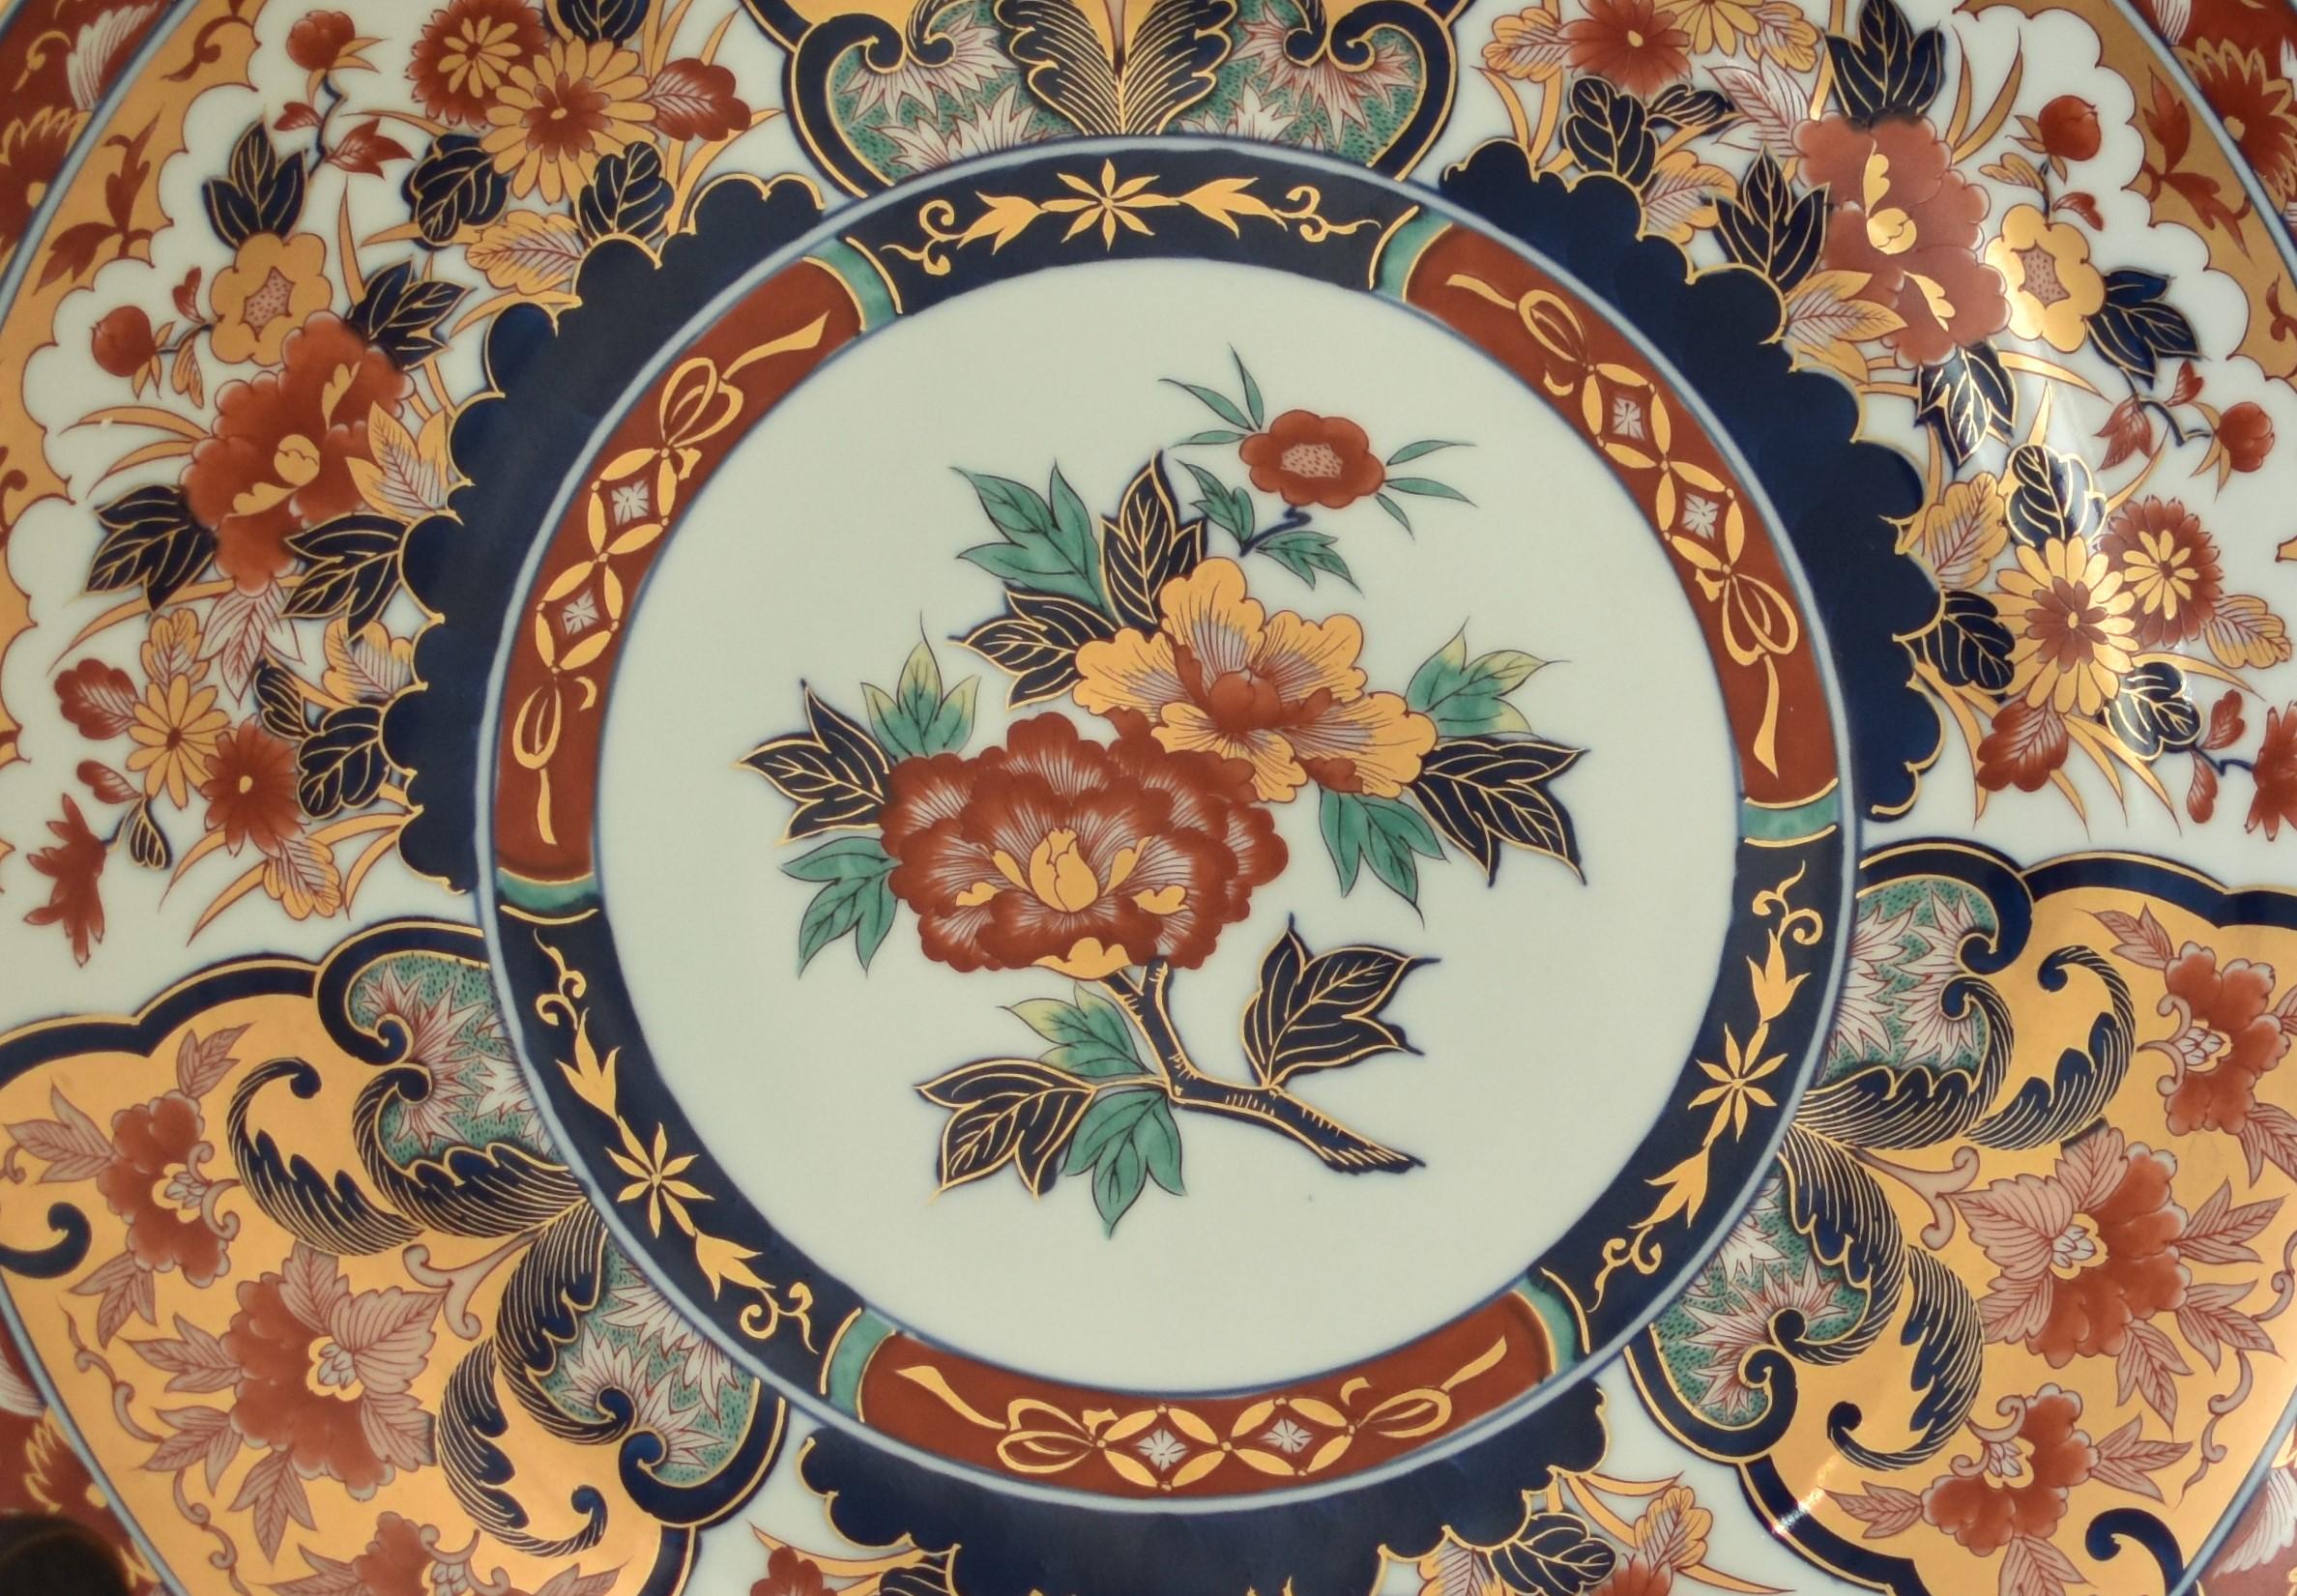 Japanese contemporary gilded porcelain Ko-Imari (old Imari) charger in blue, red, green and gold. The medallion in the center is decorated with an attractive peony in iron-red and foliage in various shades of blue and green on a pure white